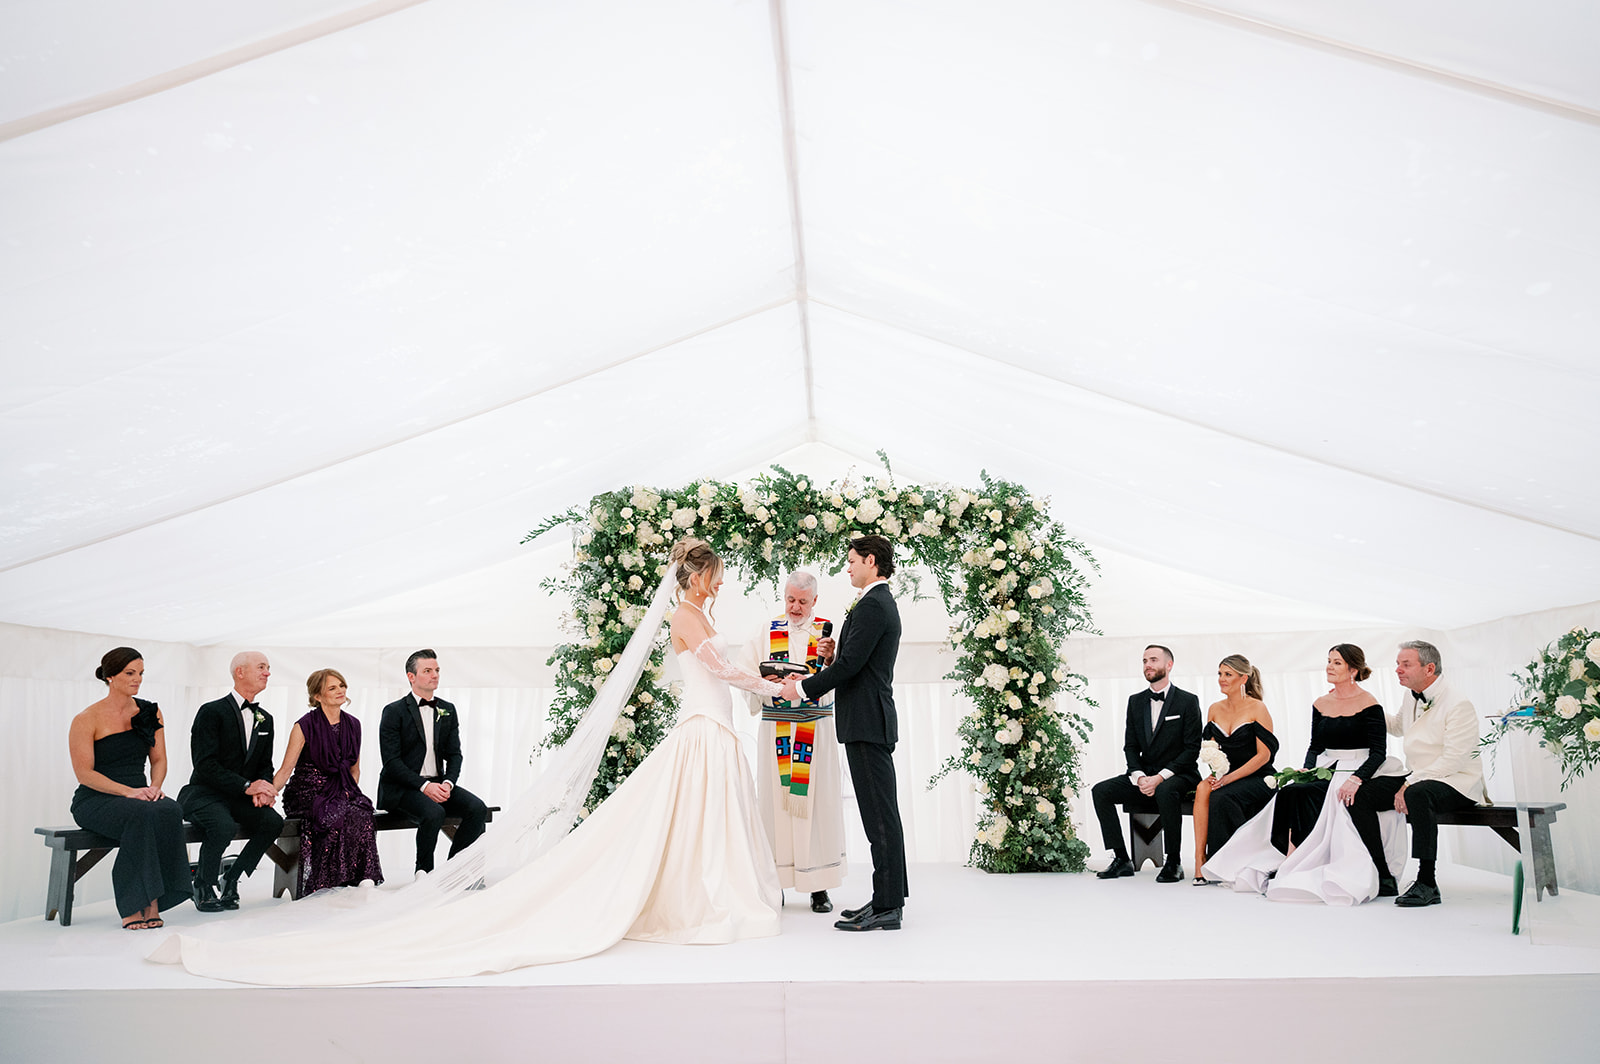 Beautiful contemporary wedding ceremony in a tent with a large floral arch.